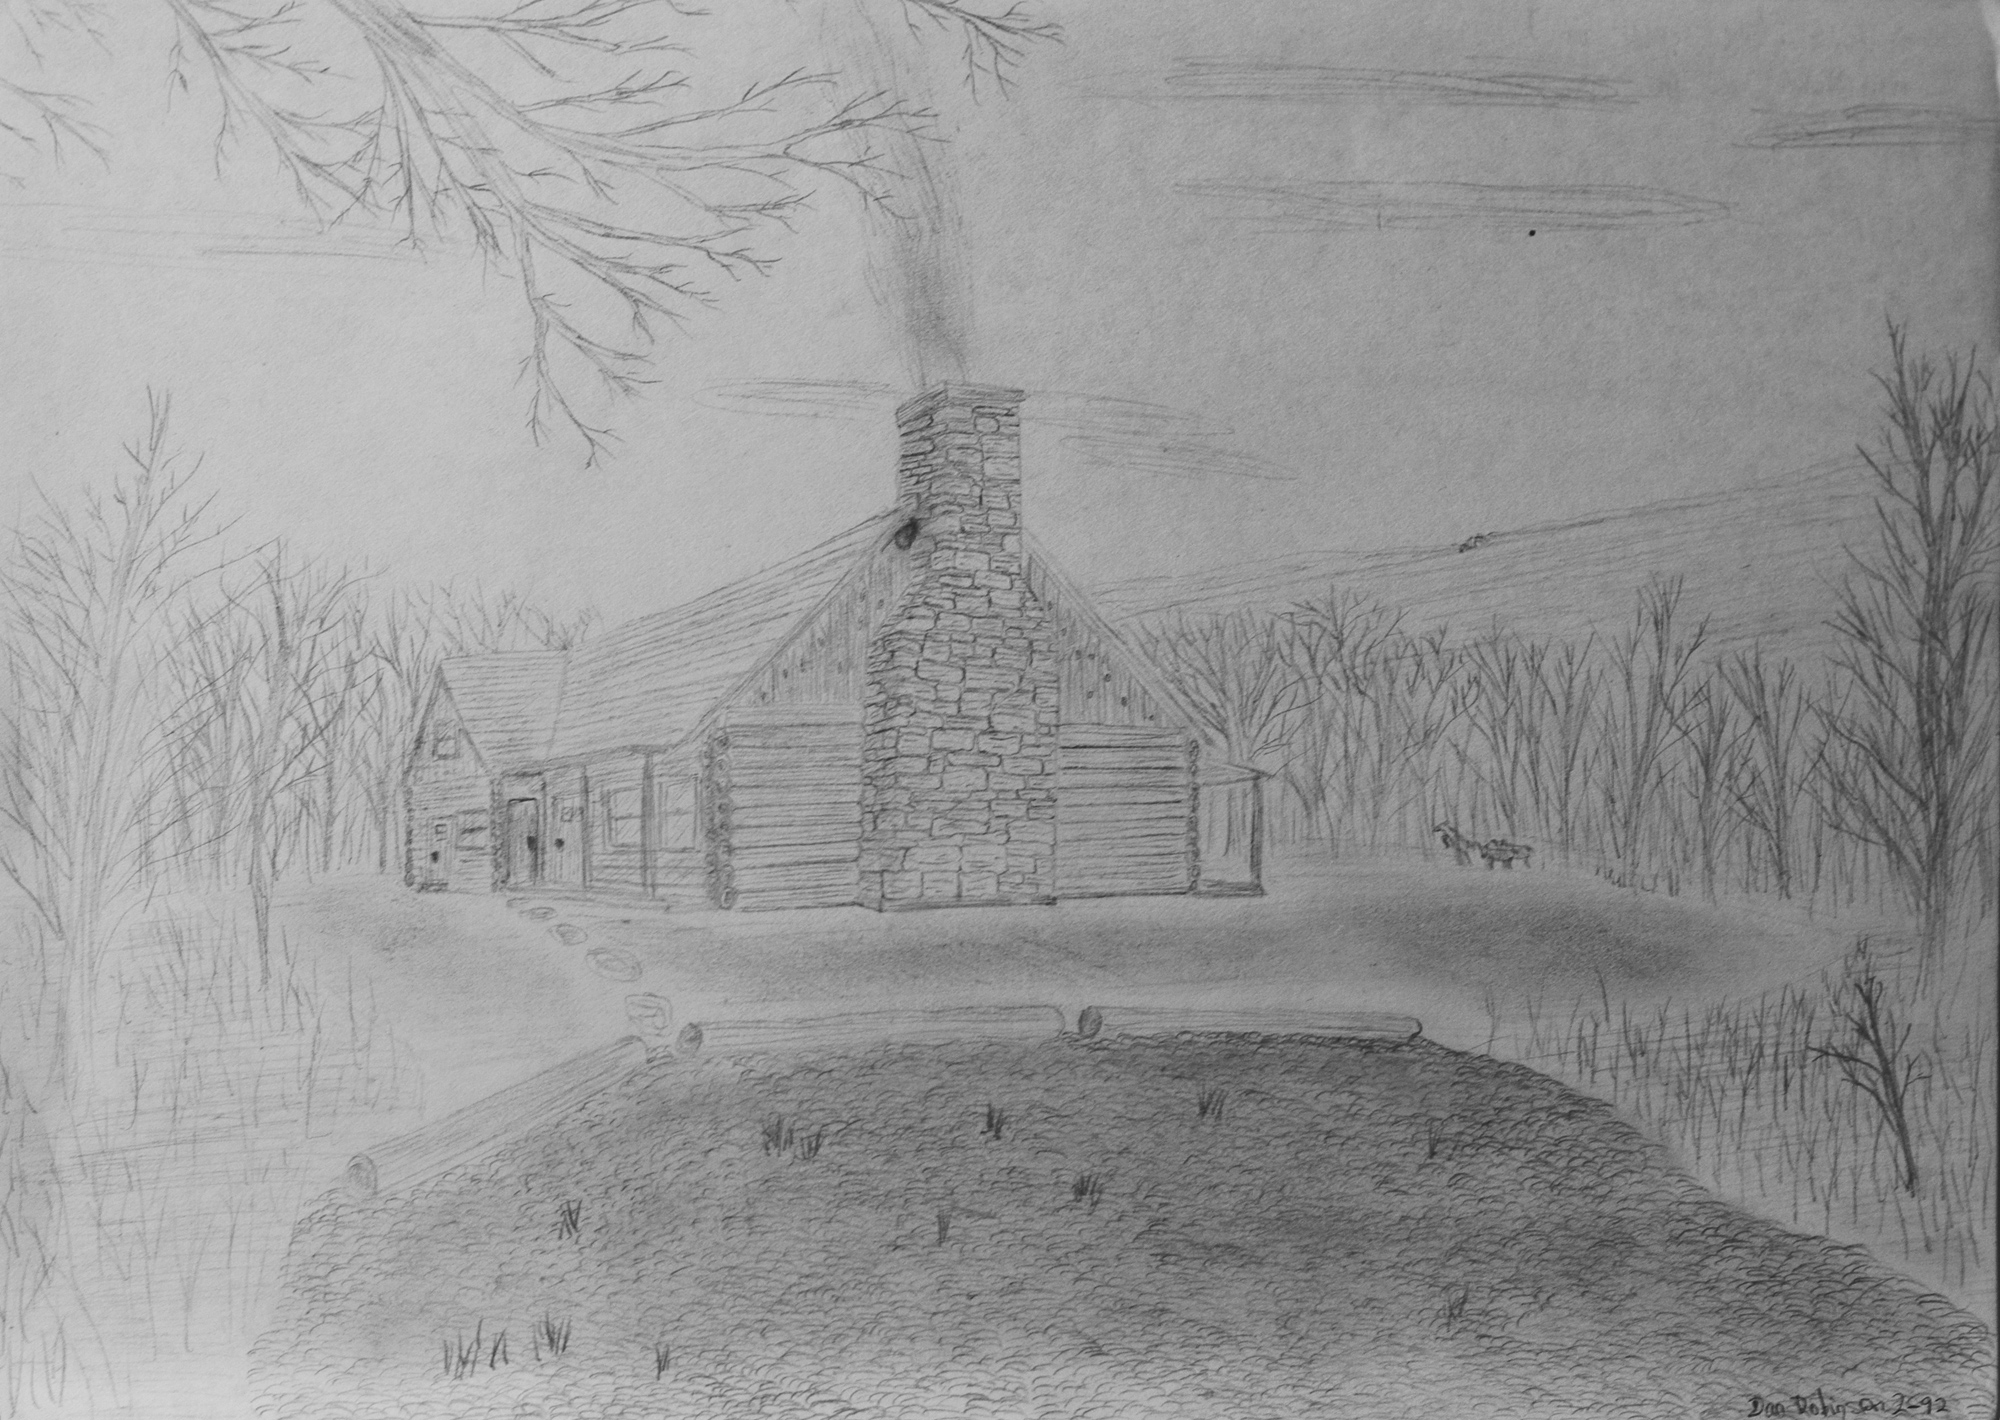 The Gazette House cabin in Canaan Valley, WV pencil sketch